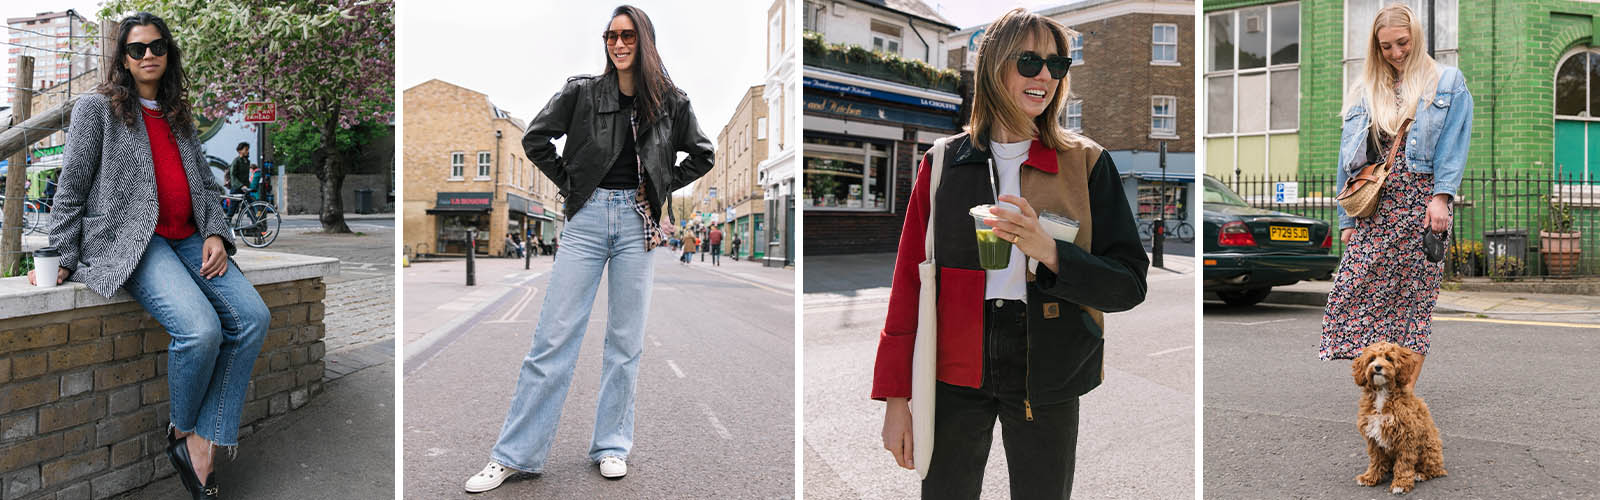 I Went Street Style–Spotting in London, and These 16 Outfits Wowed Me